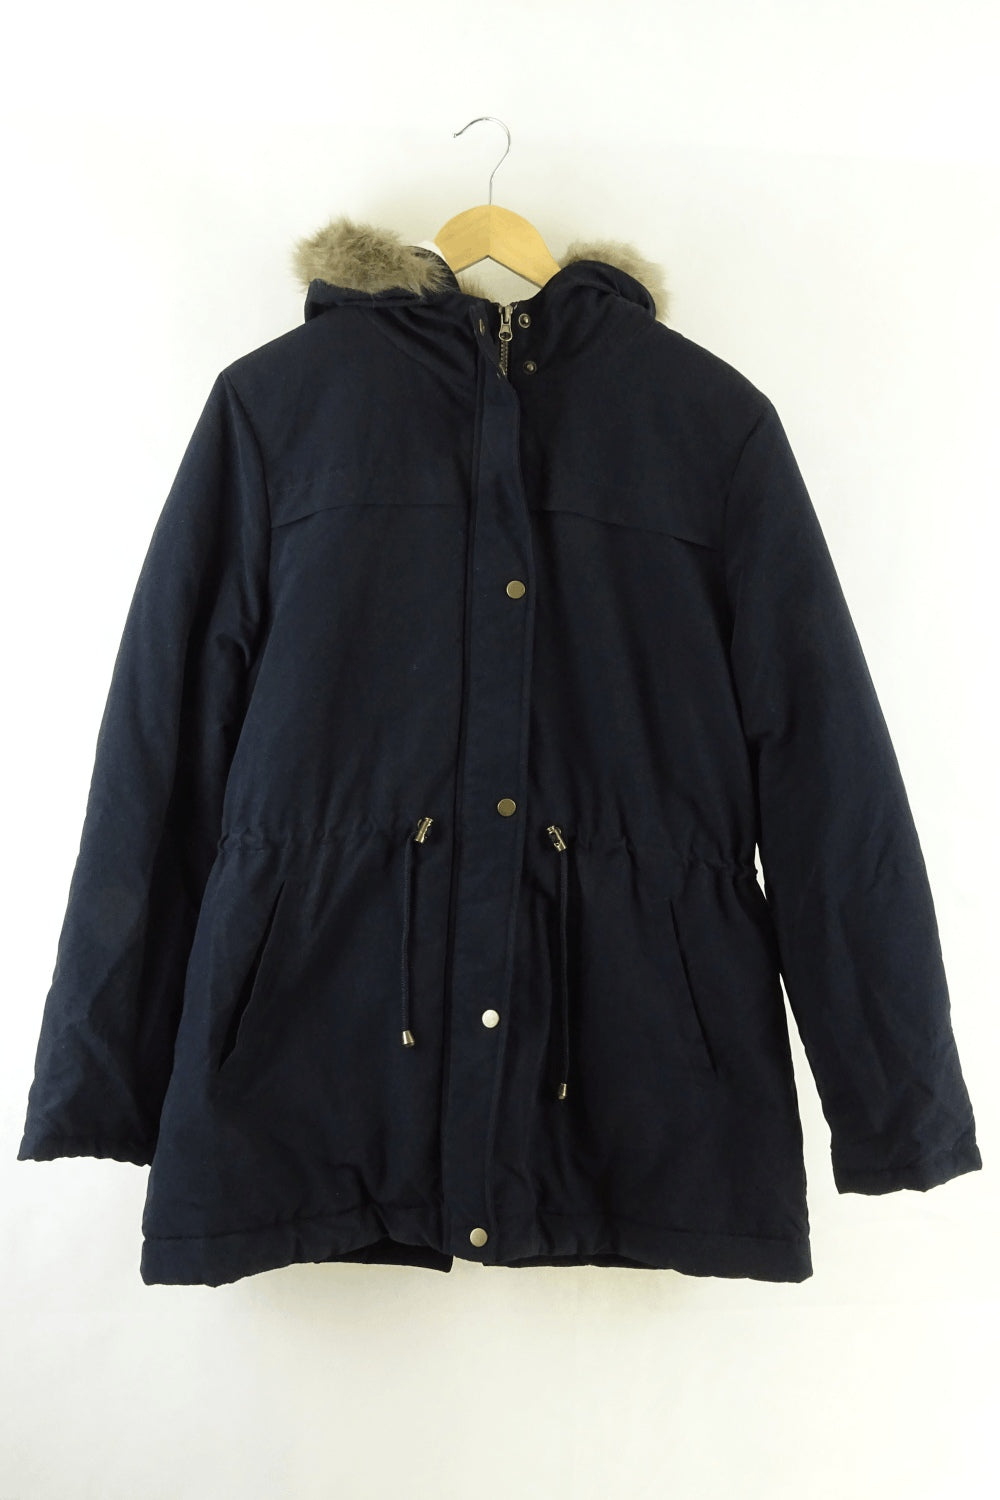 B Collection Navy Coat 16